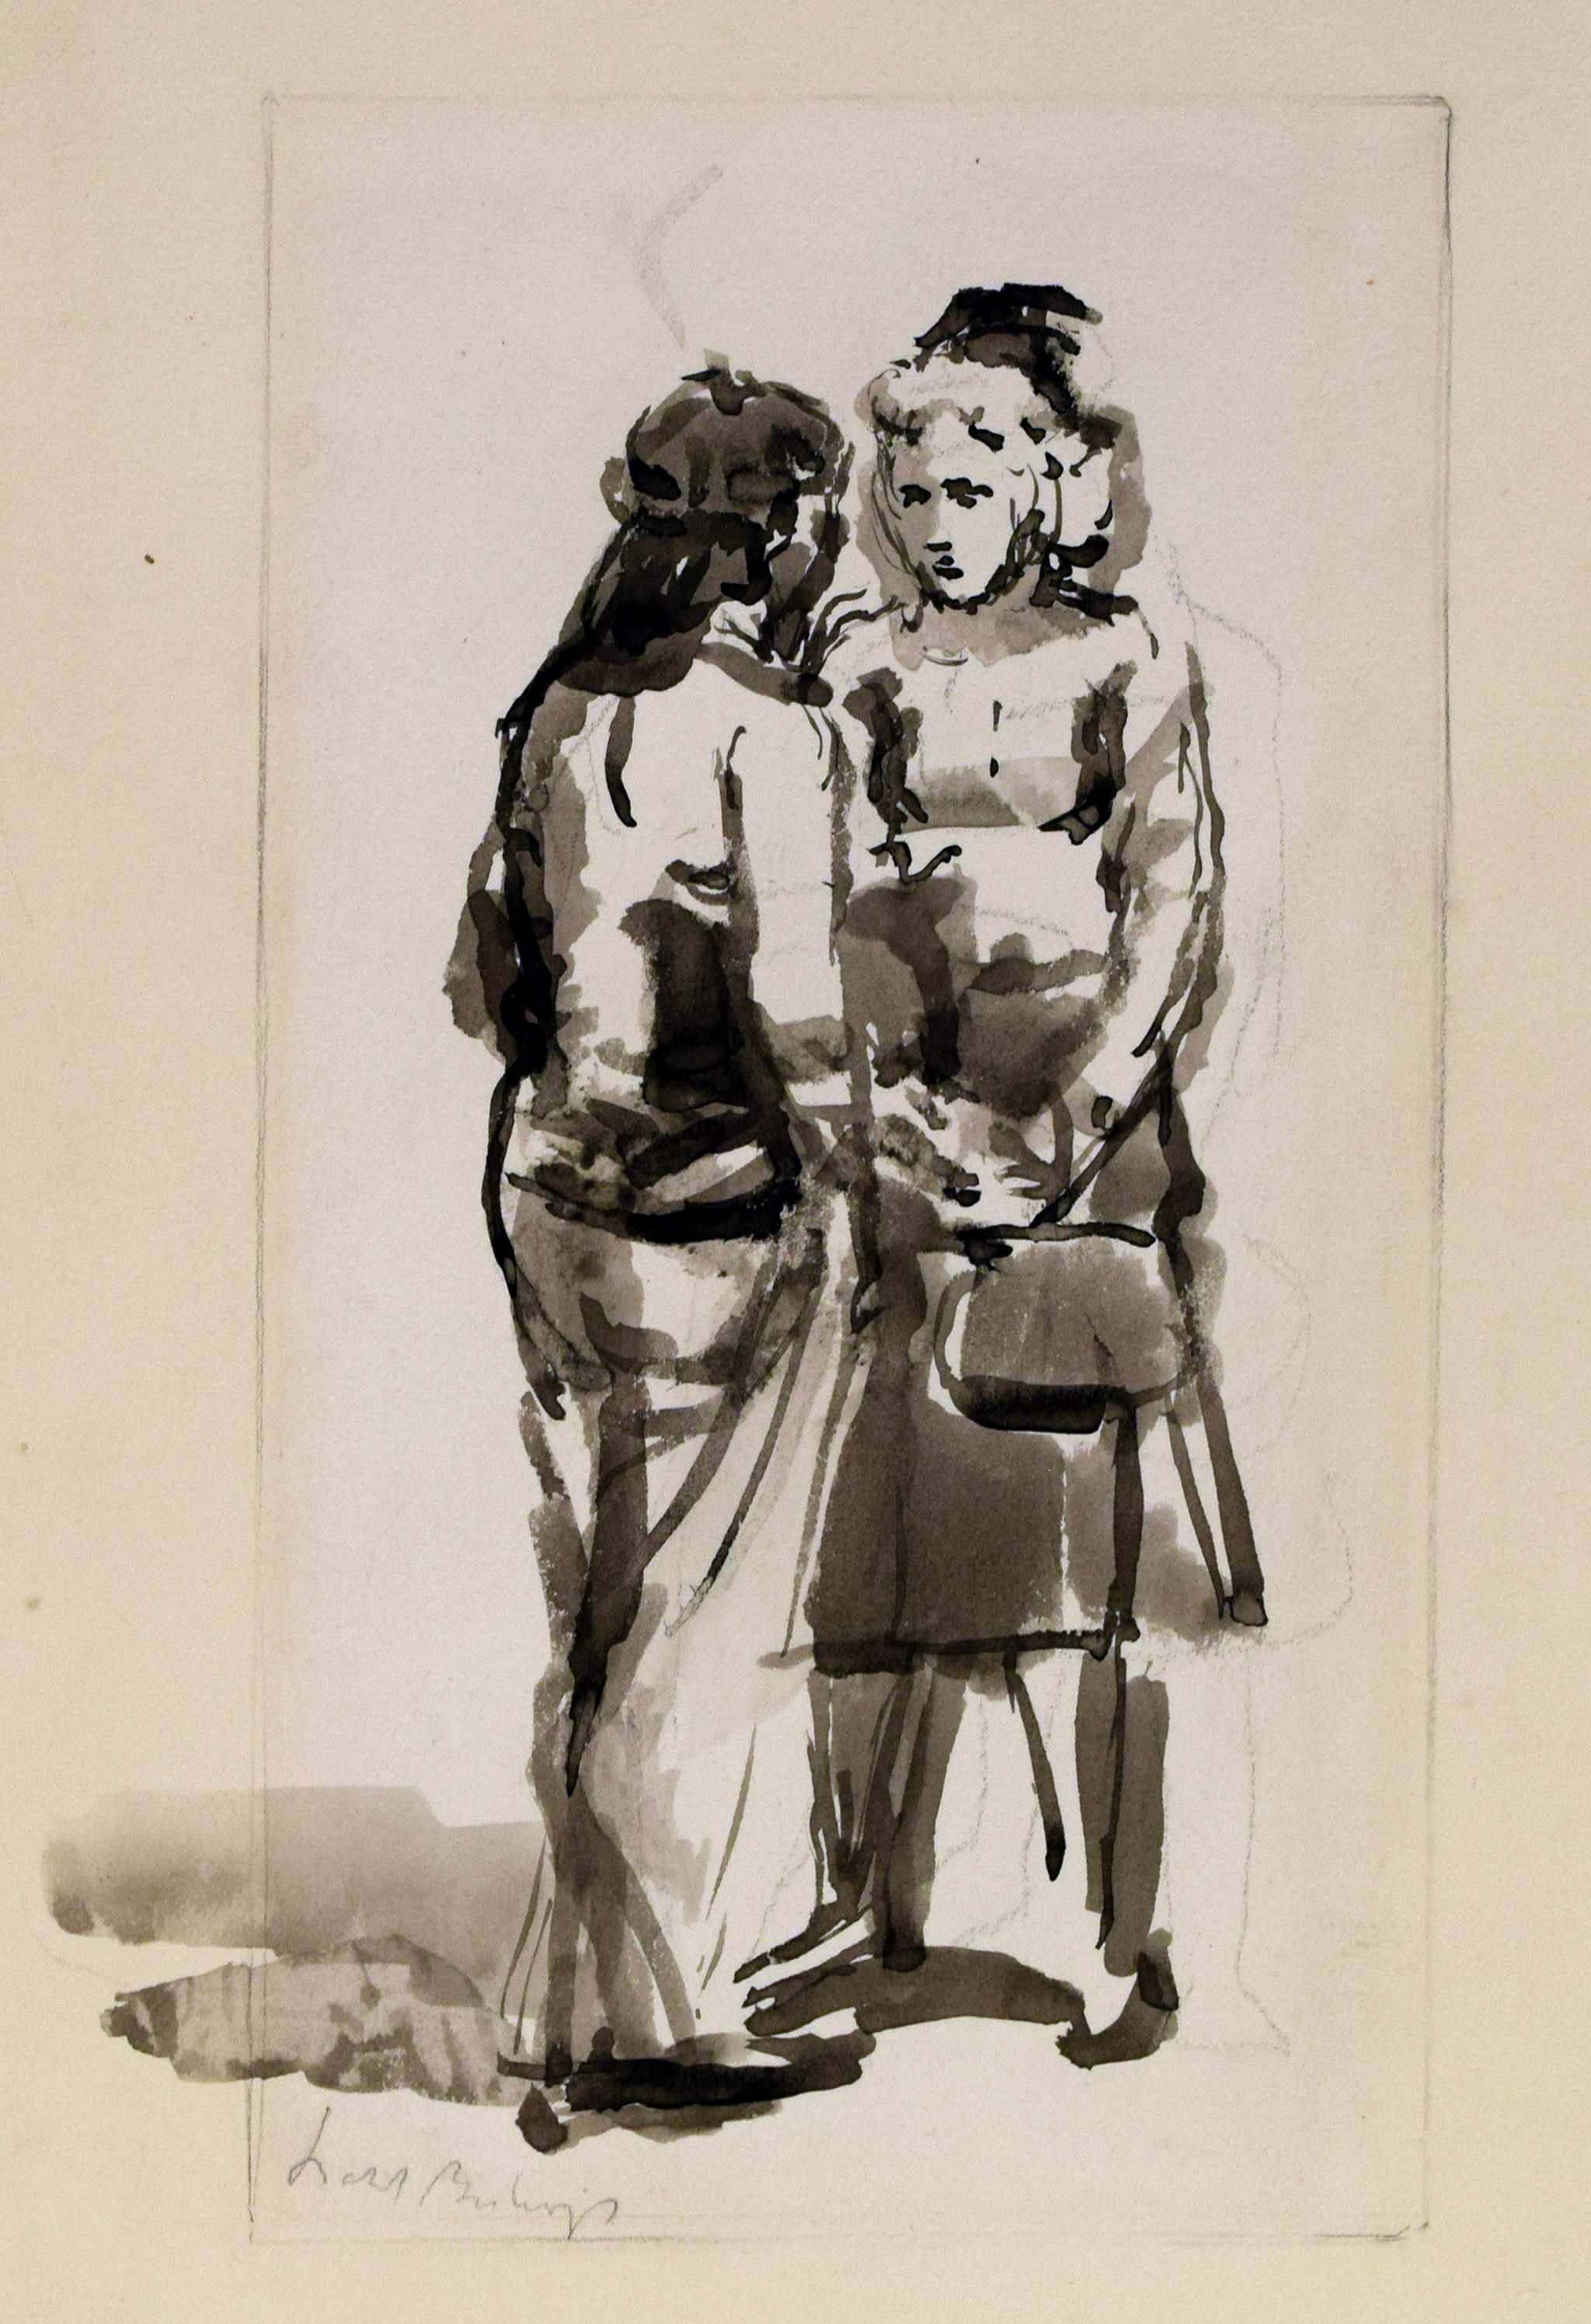 Isabel Bishop, Girl in Slacks , n.d., ink wash drawing, 18 1/8 x 13 in., Reading Public Museum, Gift of the Artist, 1962.430.1.